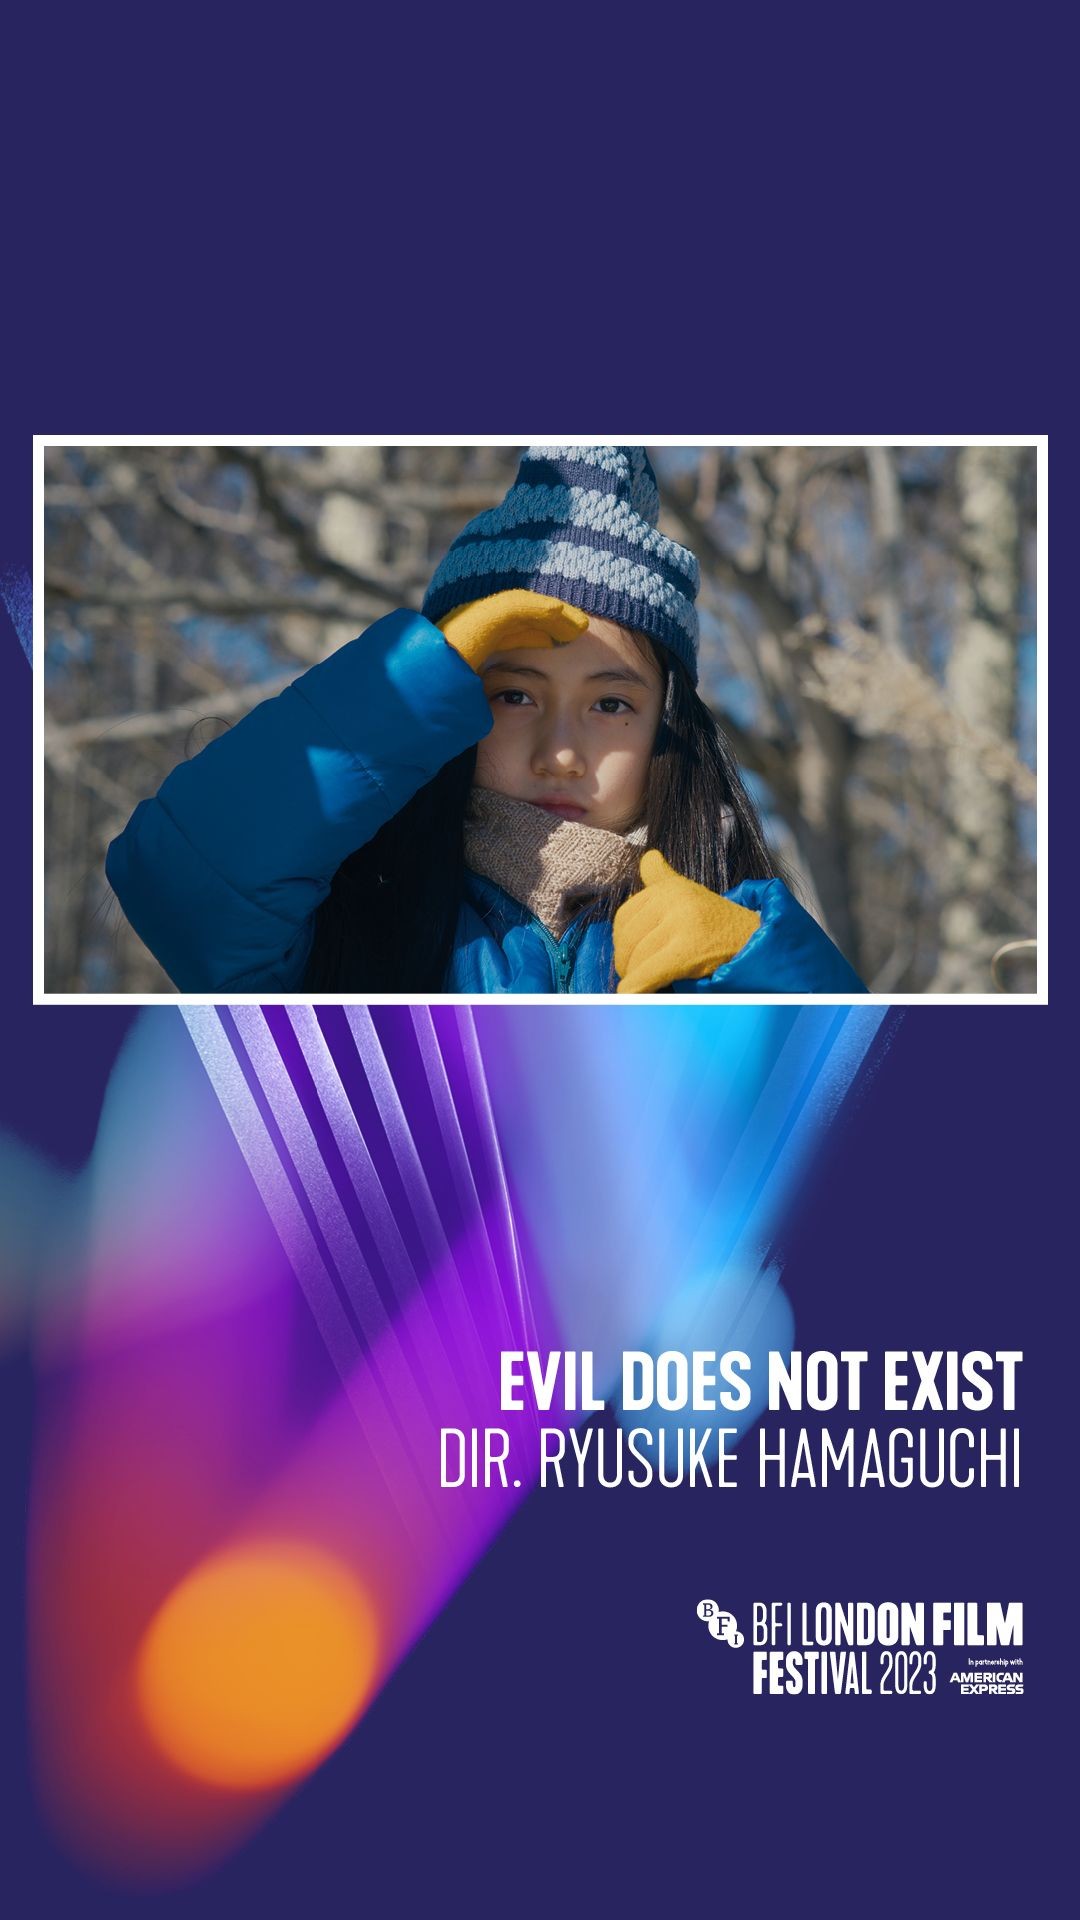 EVIL DOES NOT EXIST